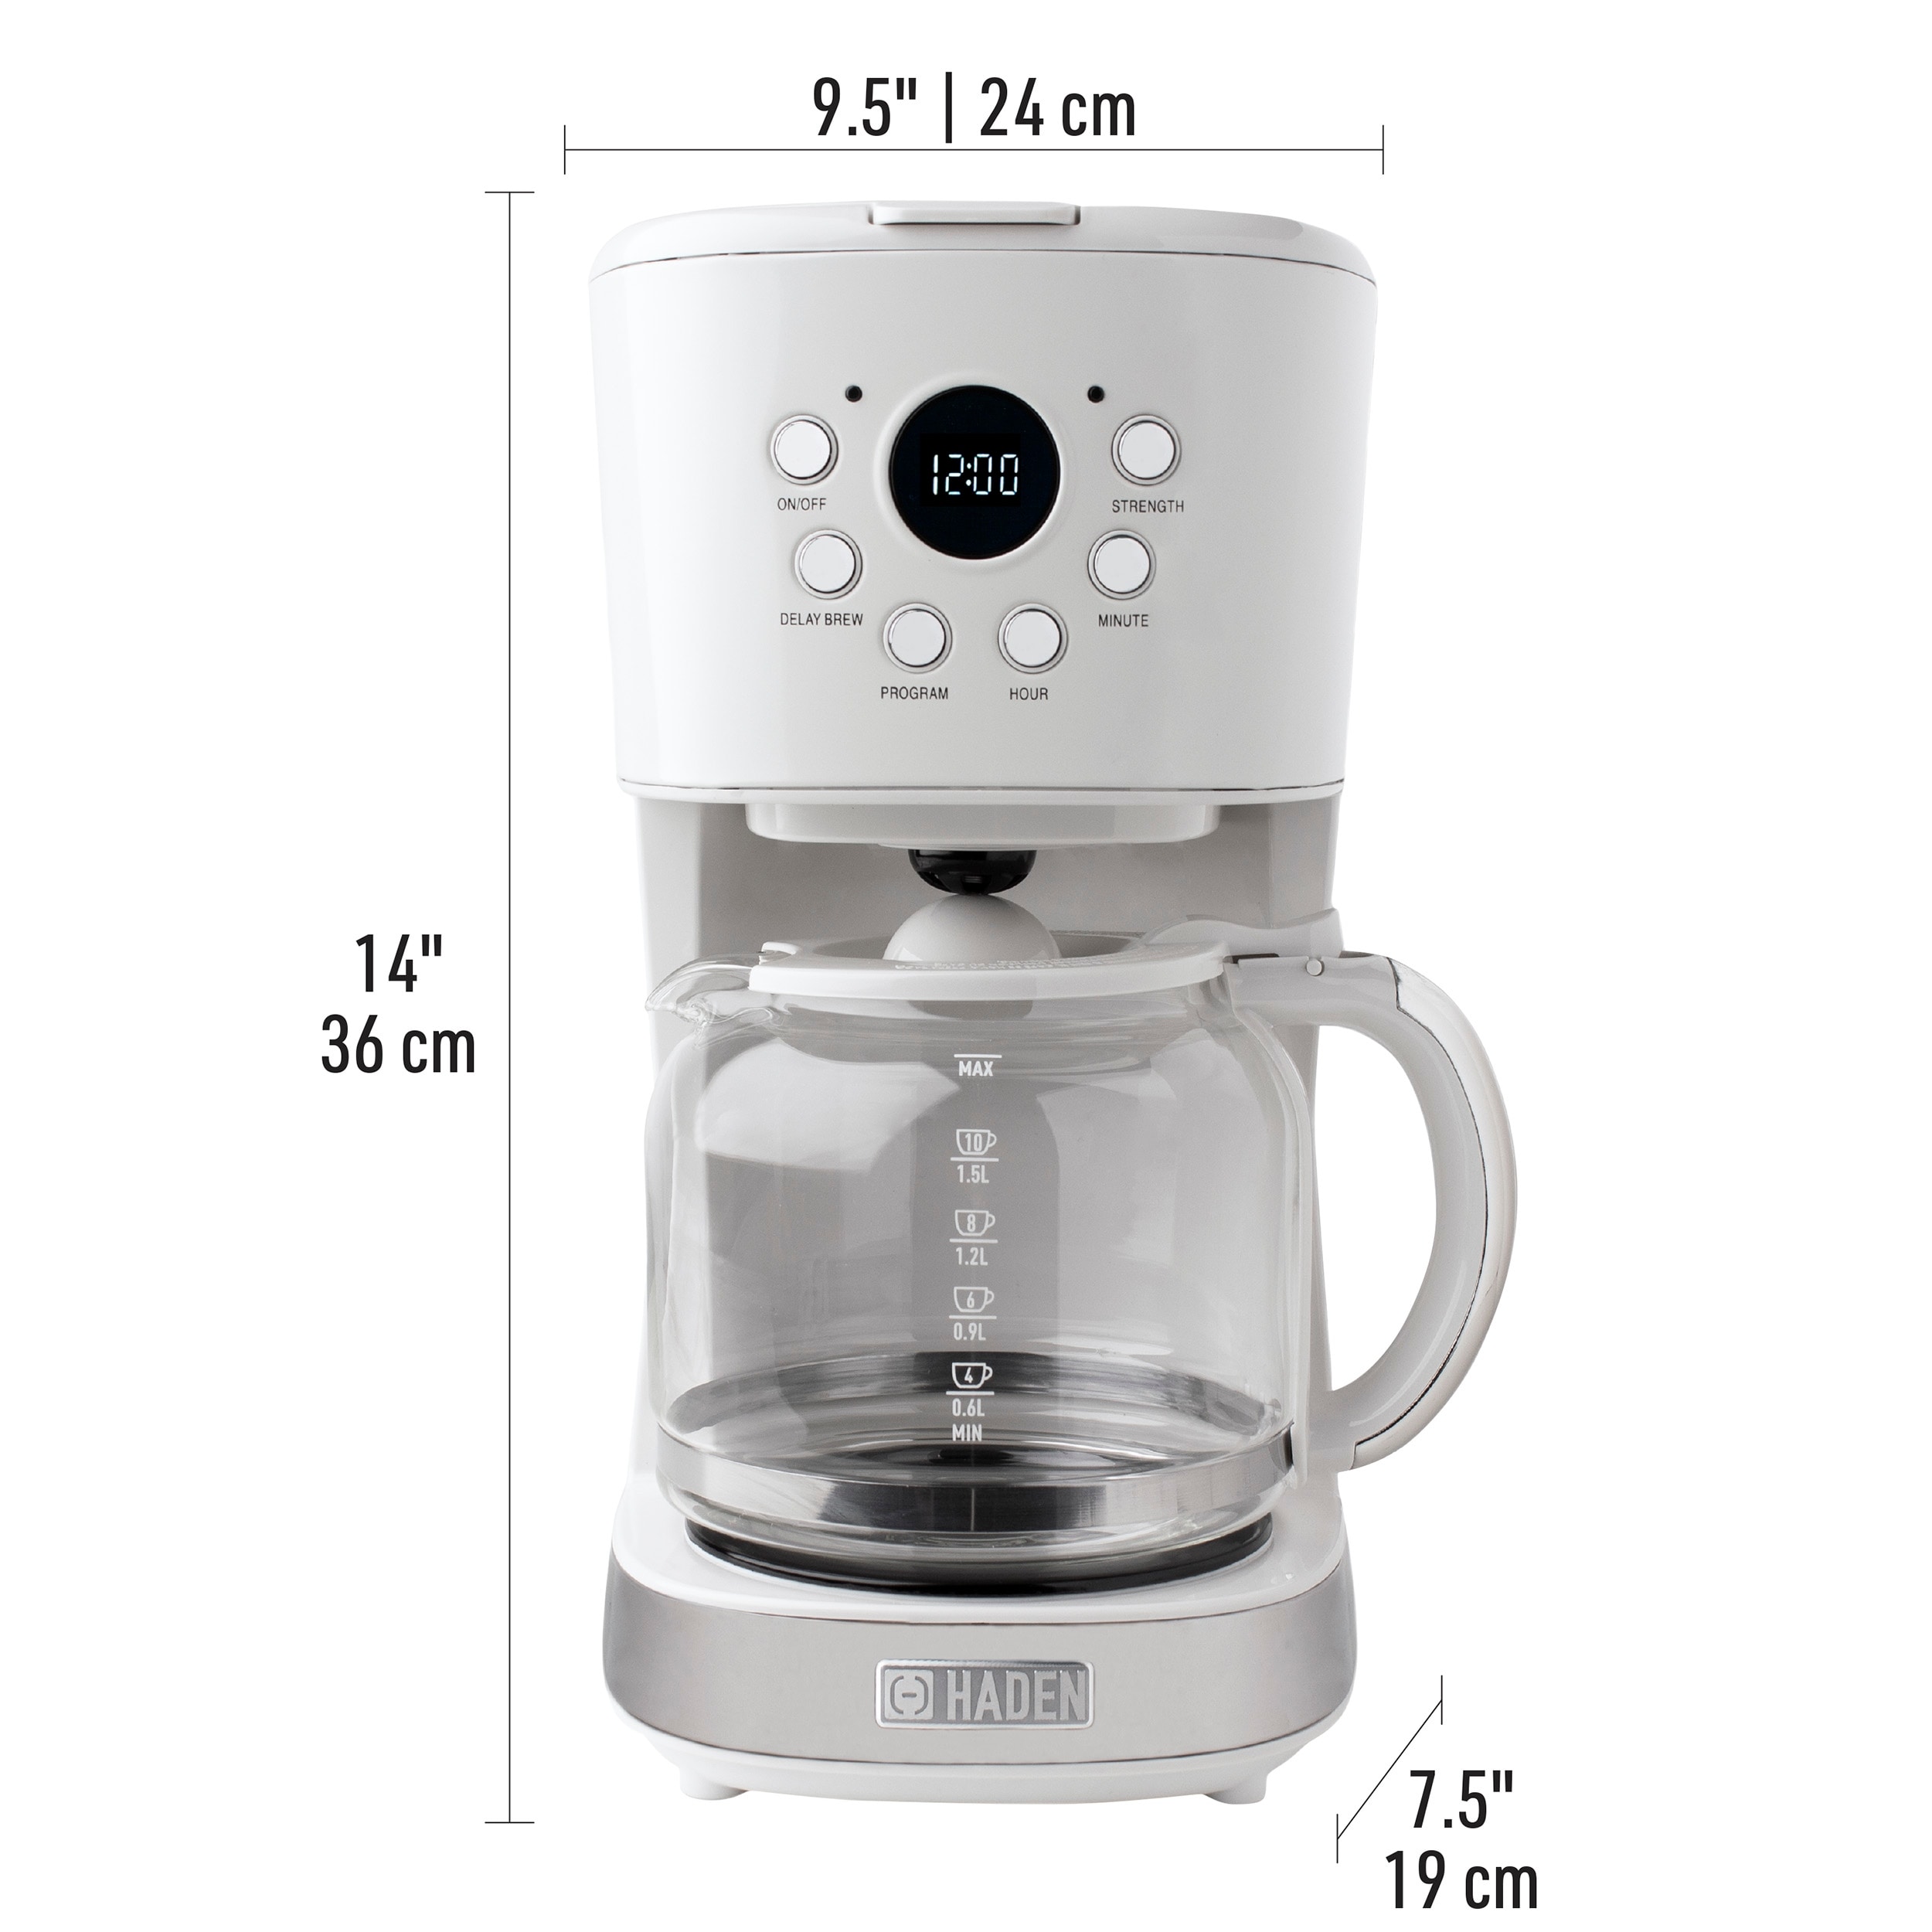 https://ak1.ostkcdn.com/images/products/is/images/direct/718a314d5f662c7a9ccd1339ab7fbe495c33716f/Haden-Dorset-12-Cup-Programmable-Coffee-Maker-with-Strength-Control-in-Putty-Beige.jpg